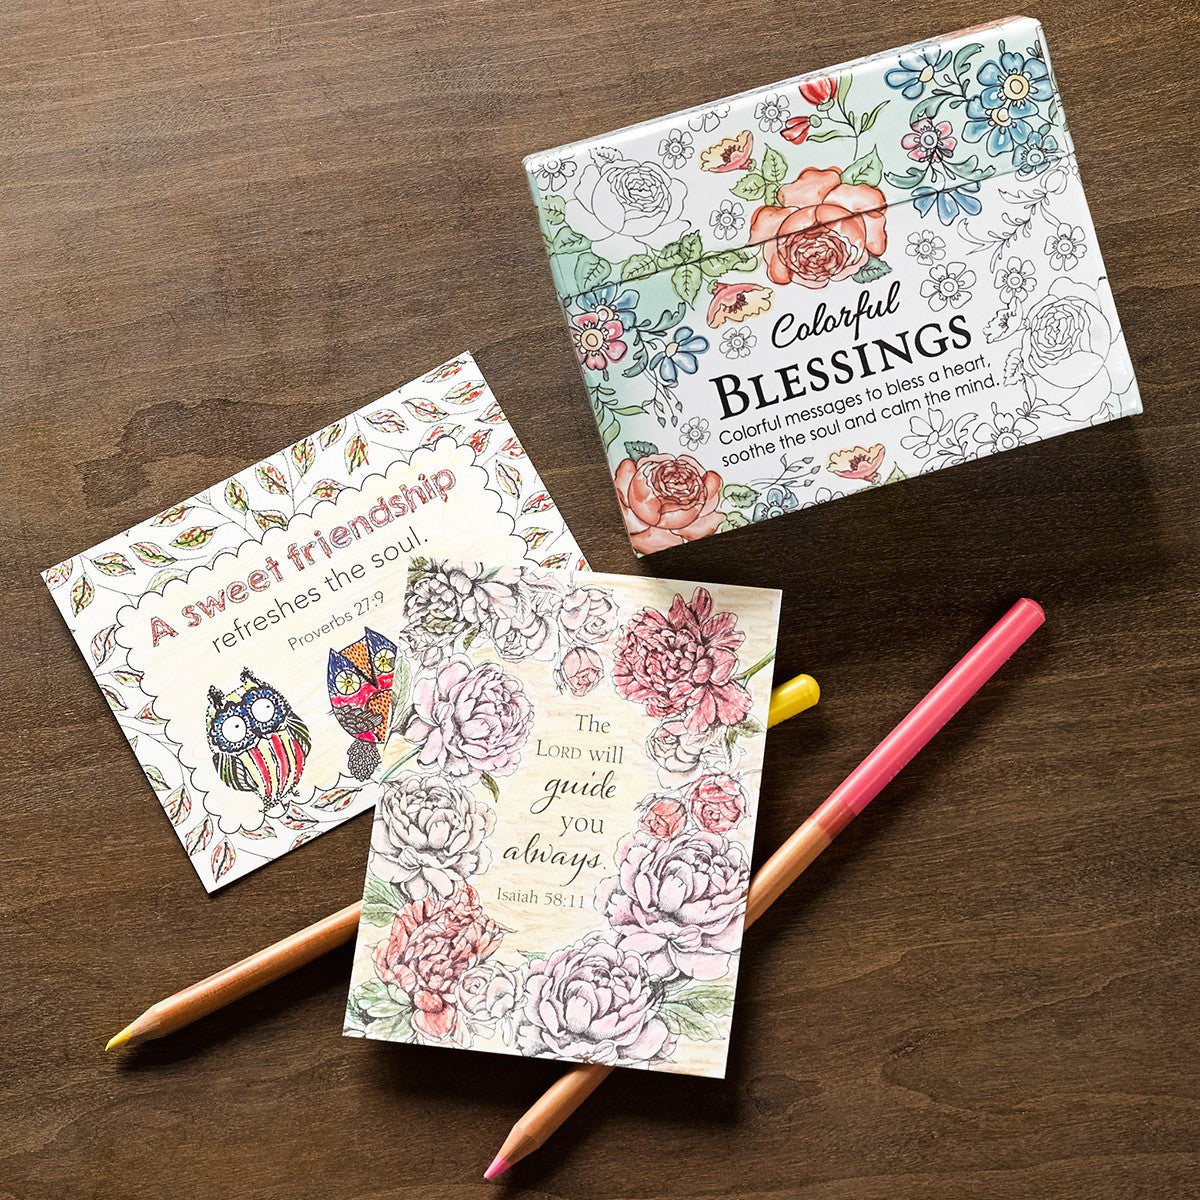 Colouring Books & Cards